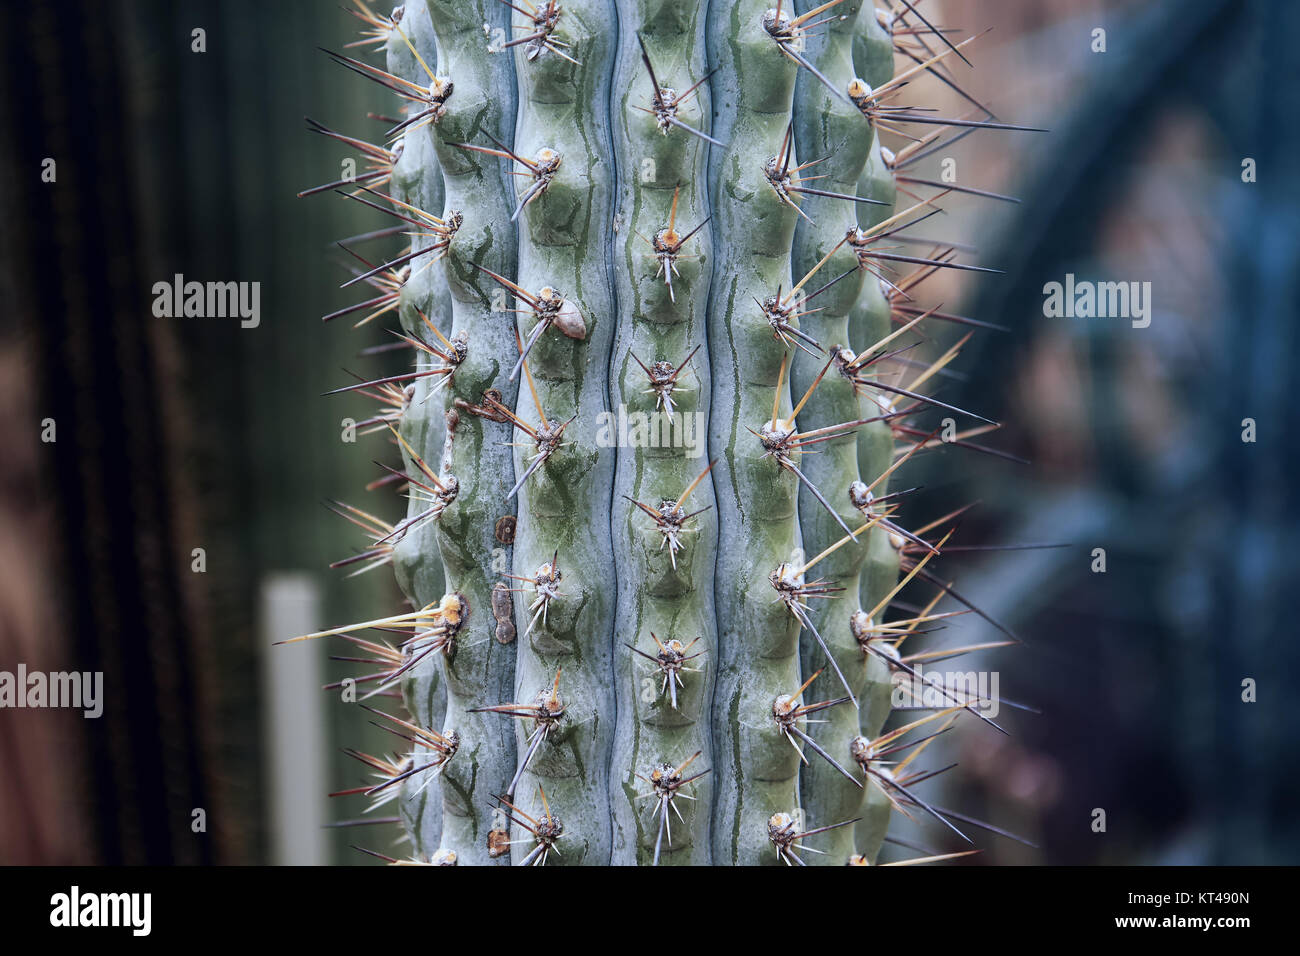 Browningia hertlingiana also known as the Blue Cereus or Blue cactus Stock Photo